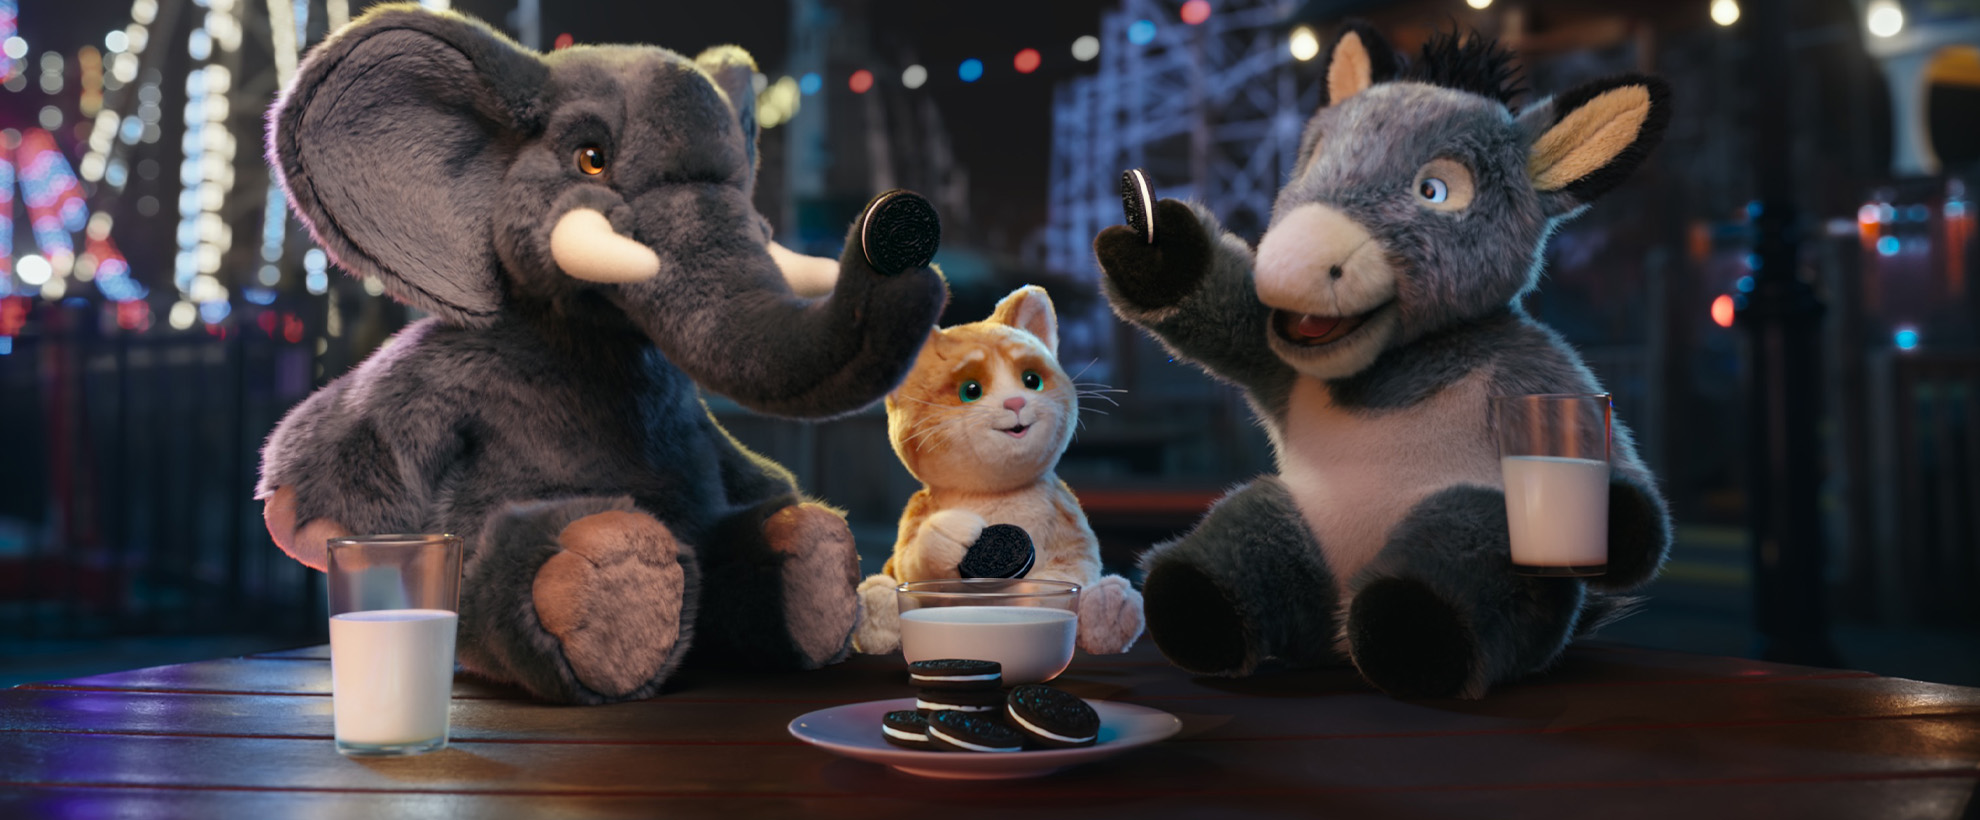 Three stuffed toy animals, an elephant, a cat, and a donkey are cheering with Oreos over glasses of milk.